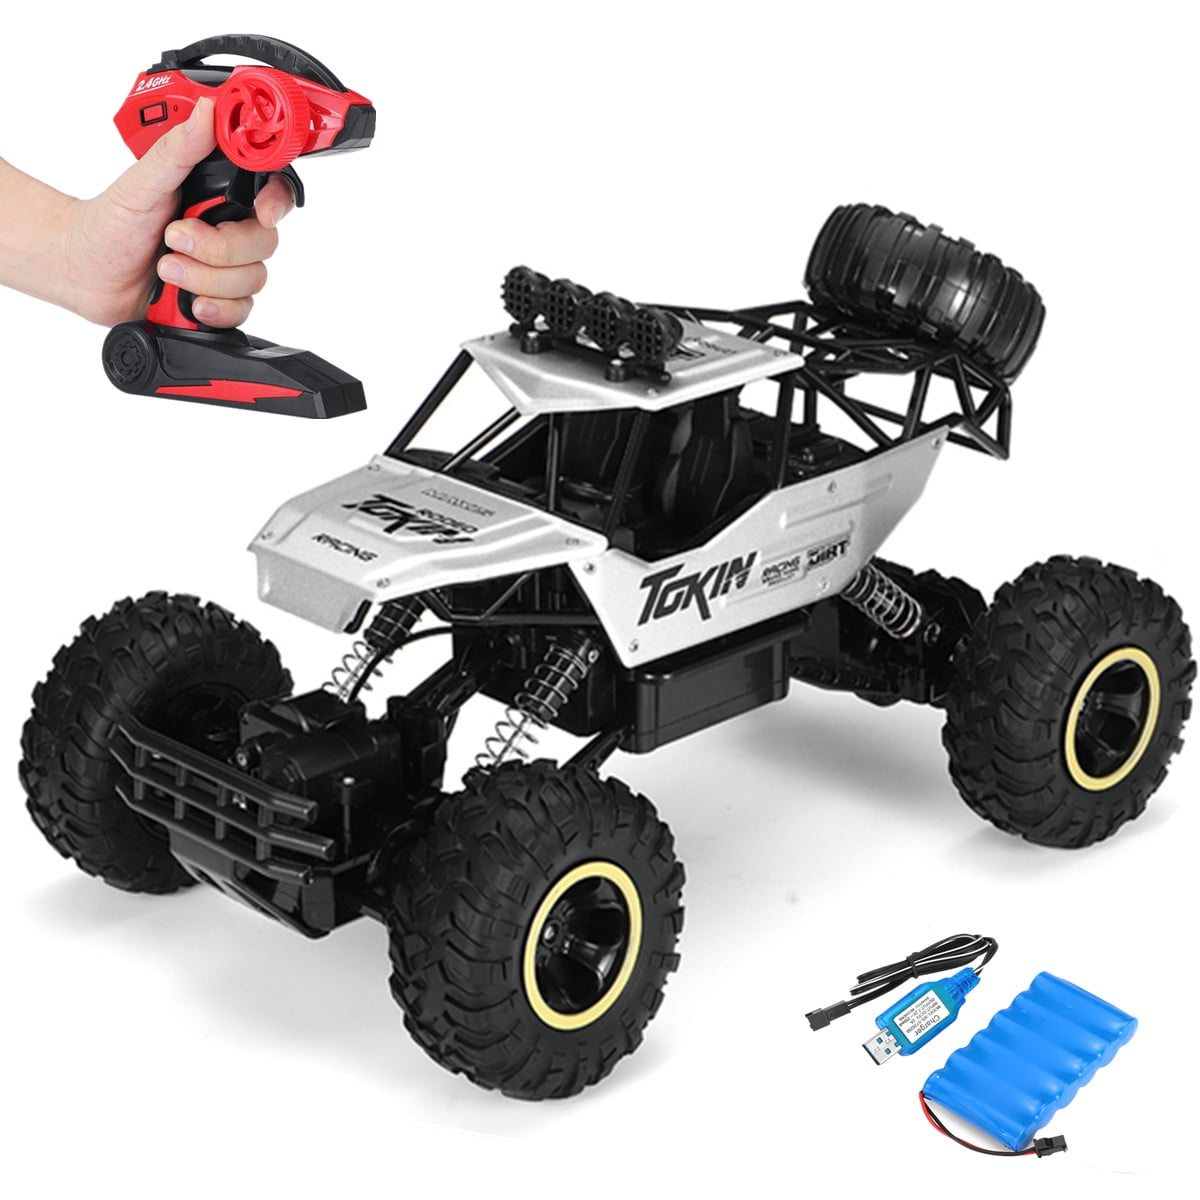 GILOBABY RC Trucks All Terrain 30 MPH High Speed 4WD 2.4Ghz Remote Control Off Road Car Vehicle for Adults and Kids 